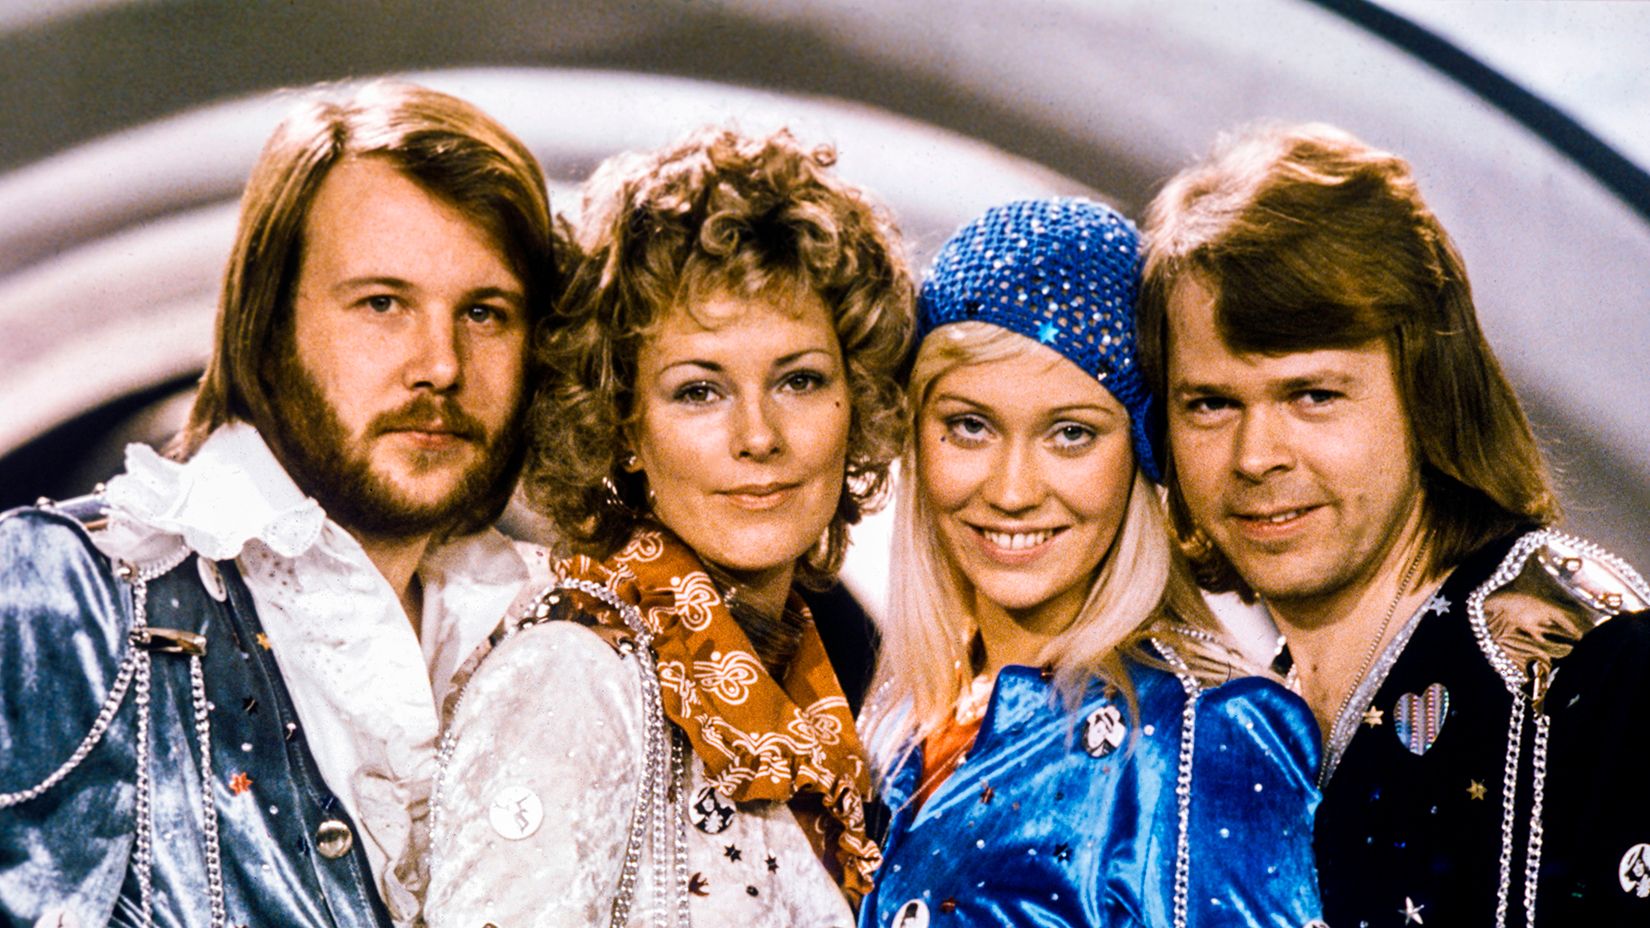 ABBA Voyage Everything you need to know about ABBA's concert (2023)